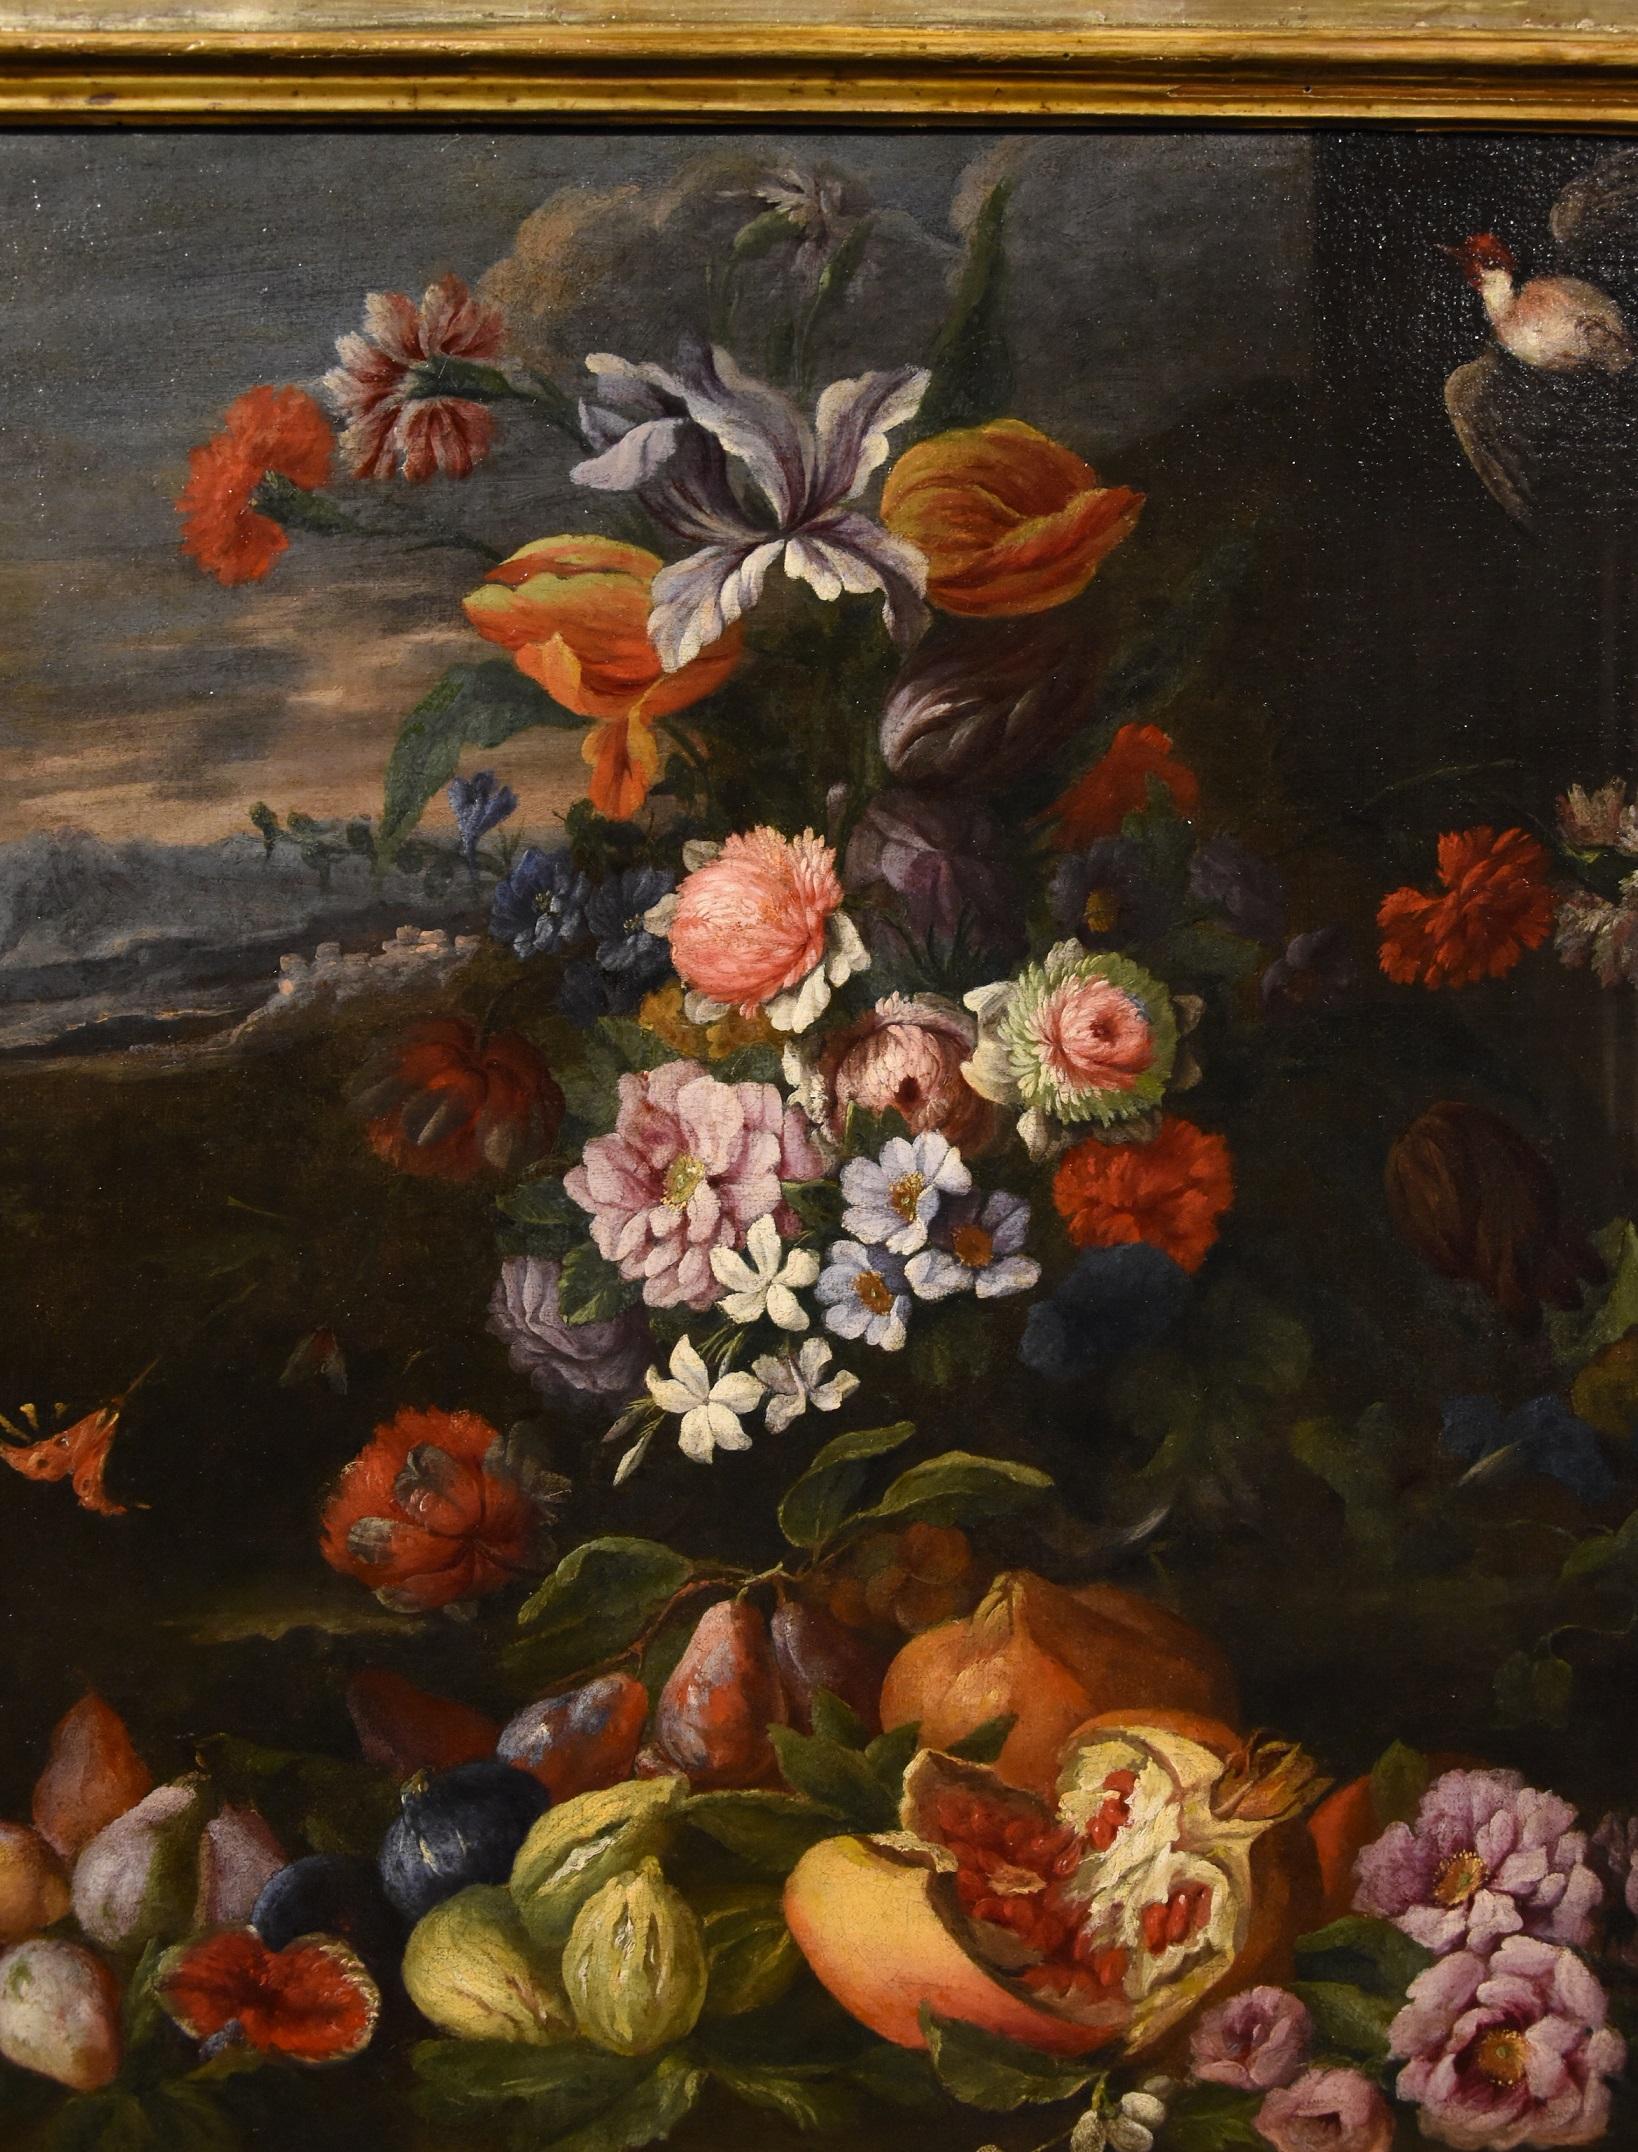 Brueghel Still Life Flowers Fruits Paint Old master Flemish 17th Century Italy - Old Masters Painting by Abraham Brueghel (Antwerp, 1631 - Naples, 1697)